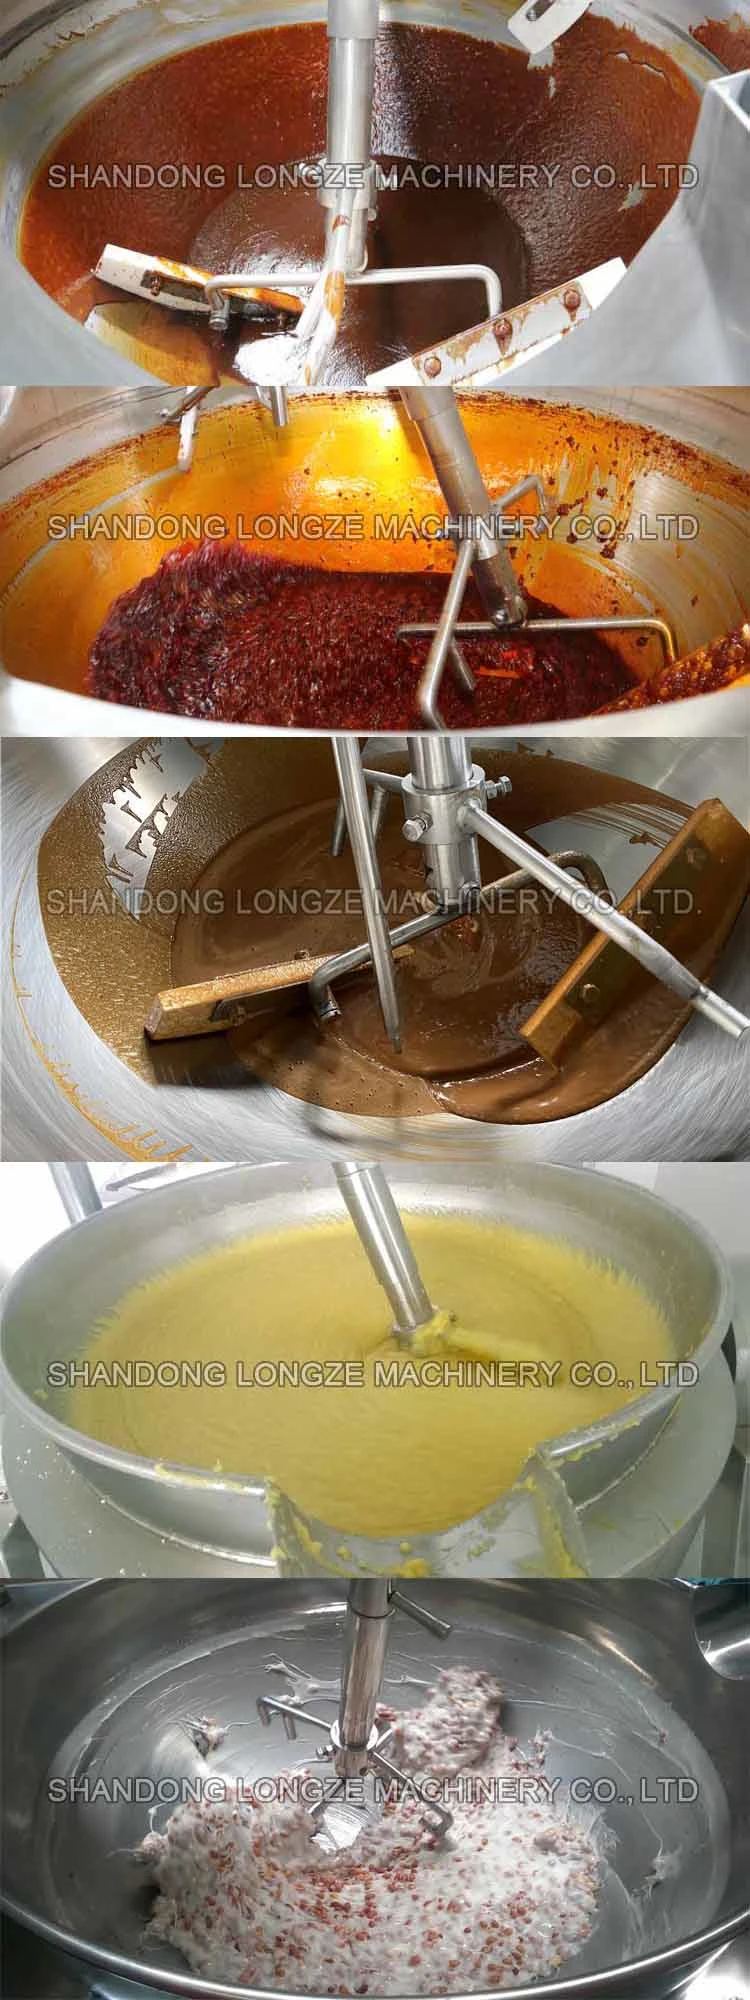 Hot Sale Cooking Vegetable Cooking Mixer Machine Candy Cooker Mixer Rice Cooking Machine